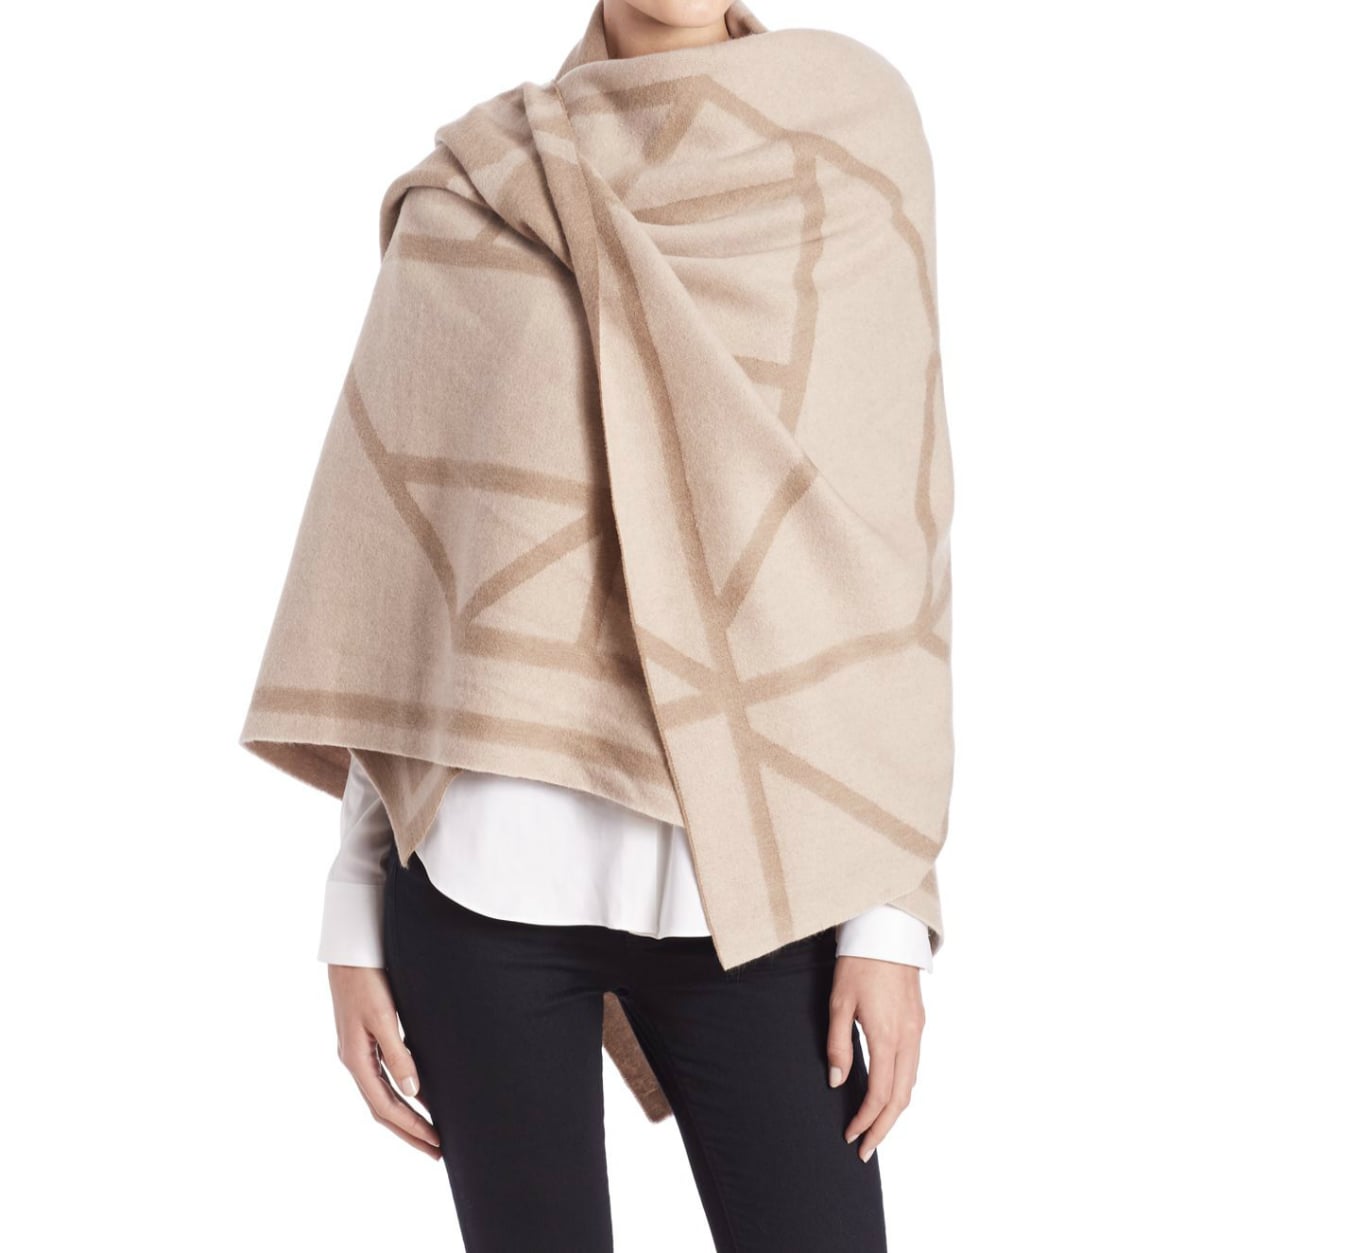 Tory Burch Fret Jacquard Wool & Cashmere Blanket Scarf ($350) | 150+  Fashion Gifts to Add to Your Holiday Wish List Now | POPSUGAR Fashion Photo  158